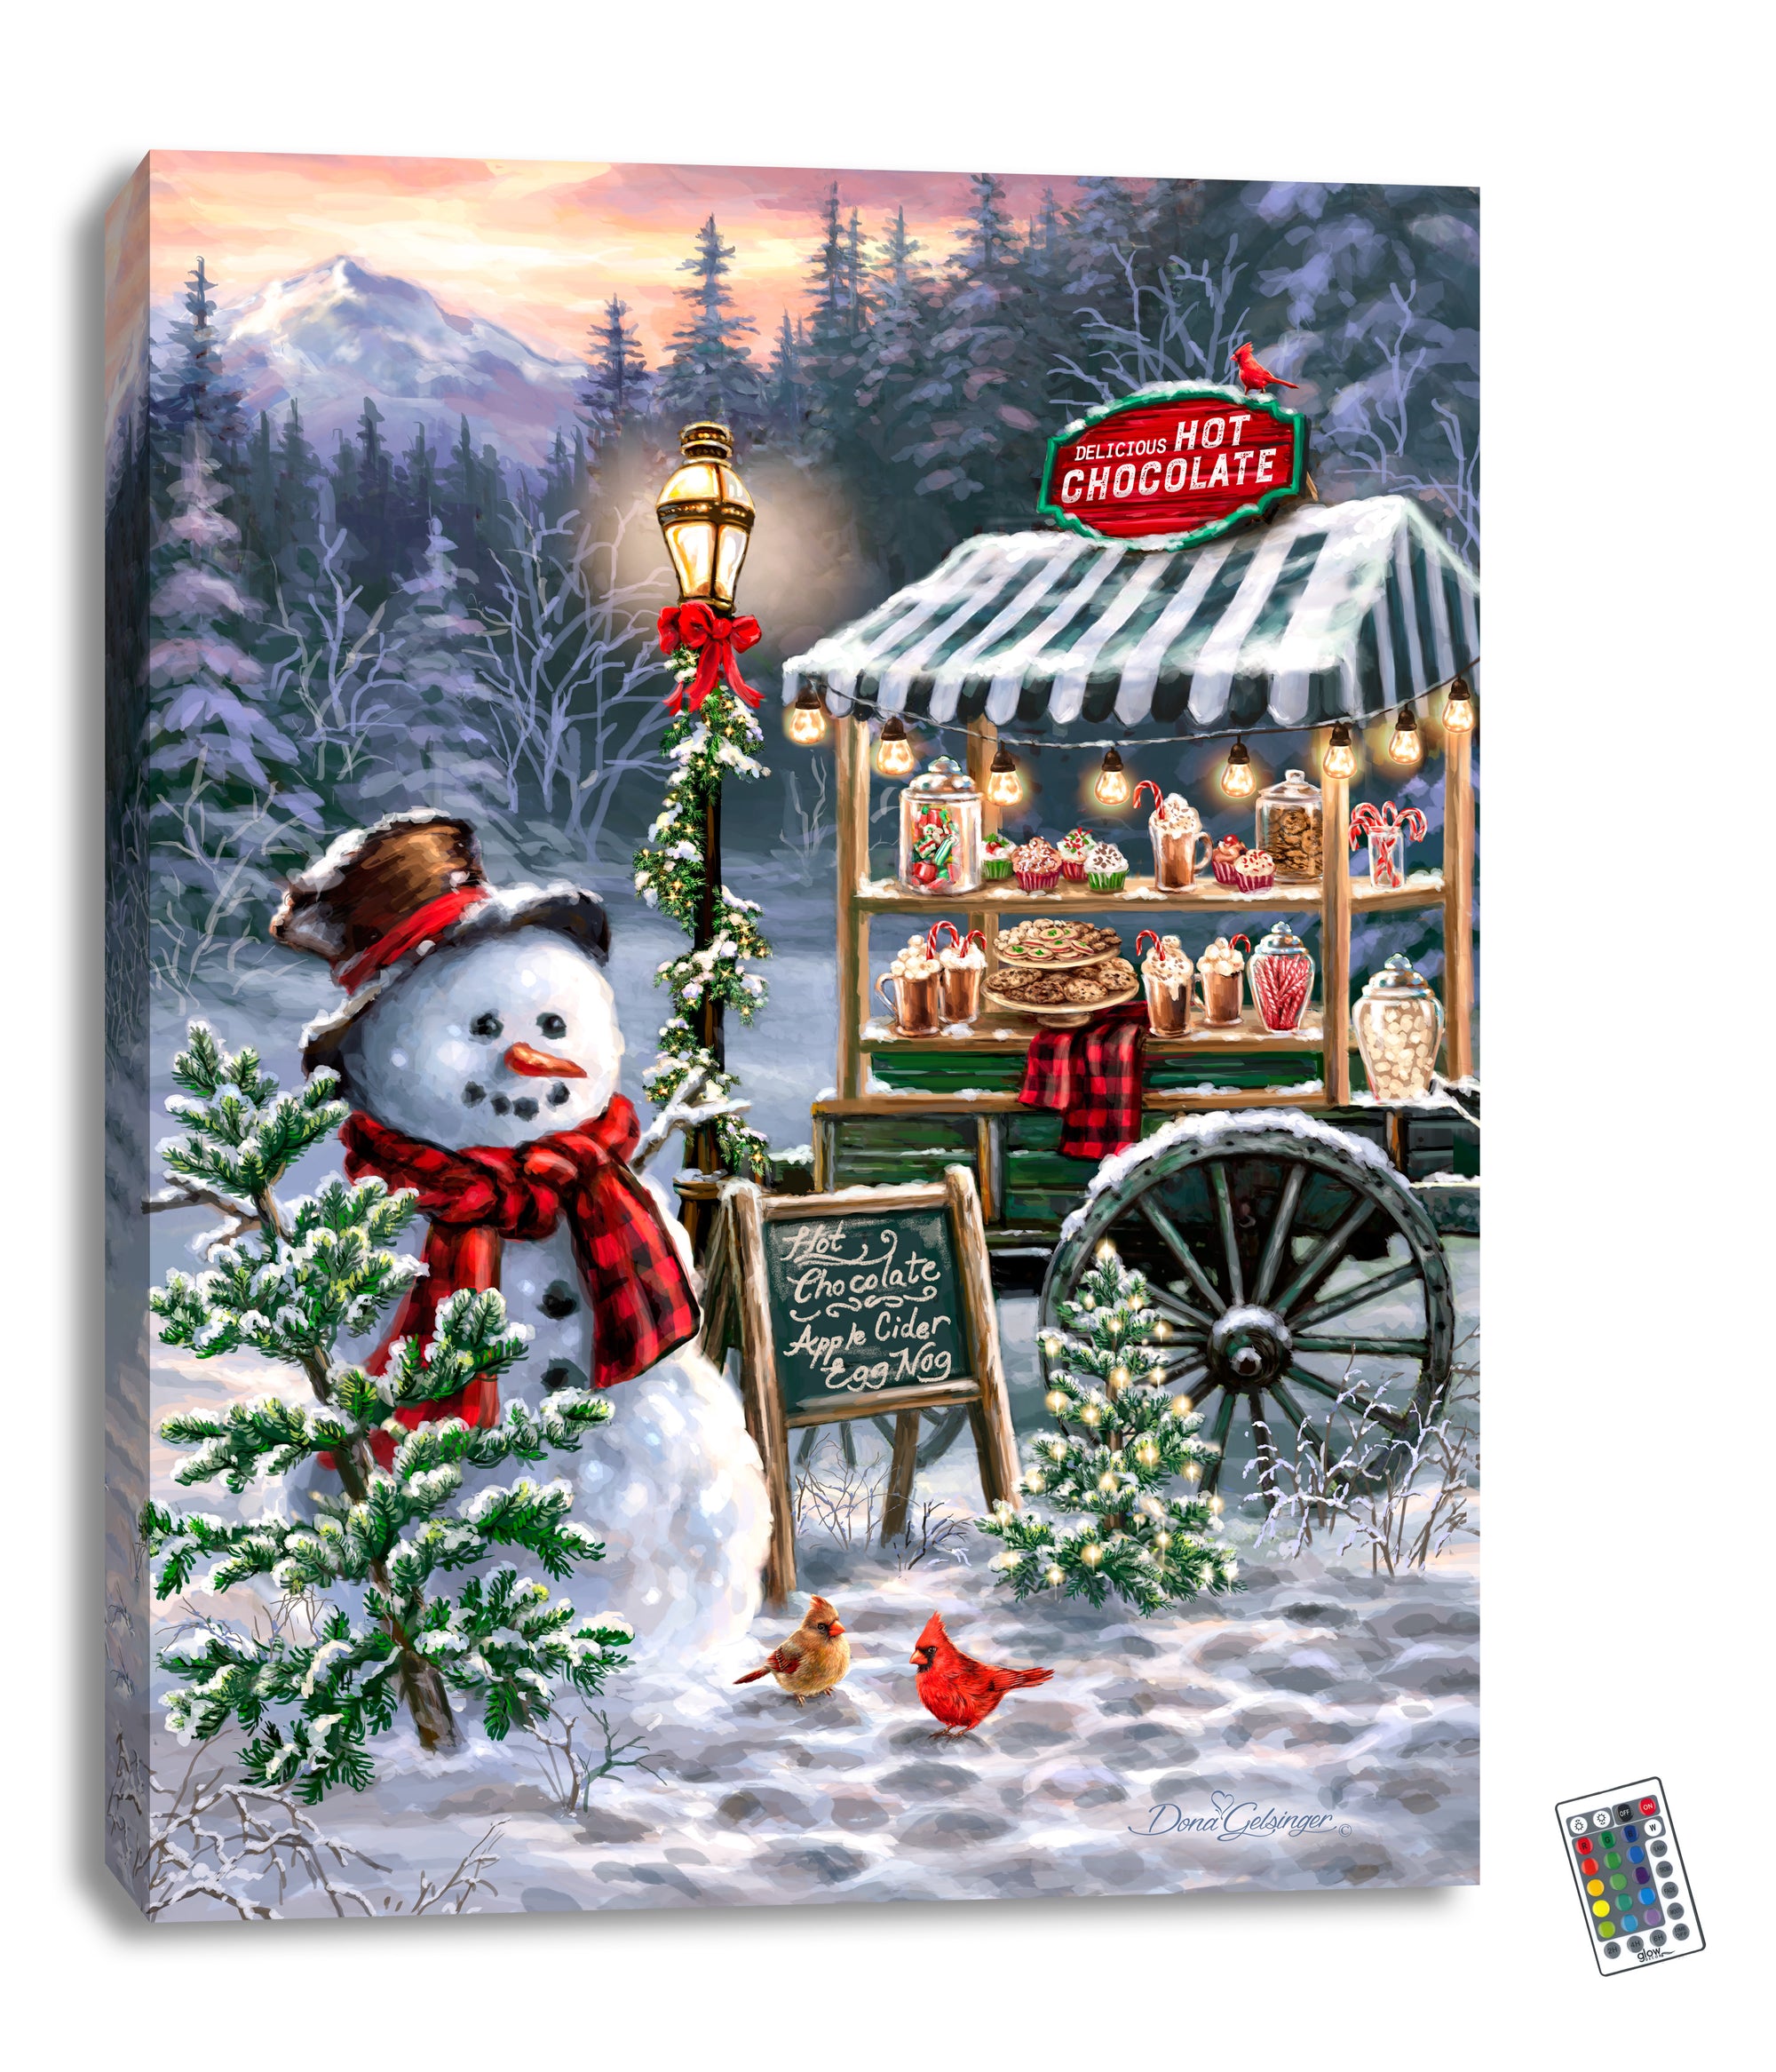 Featuring a charming snowman dressed in a top hat and scarf, standing in front of a beautifully garland-wrapped lantern, this artwork sets the perfect scene for a romantic winter date.  But the real star of the show is the fully stocked hot chocolate stand, complete with everything you need to make the perfect cup of cocoa. From fluffy marshmallows to candy canes, cookies, and cupcakes.